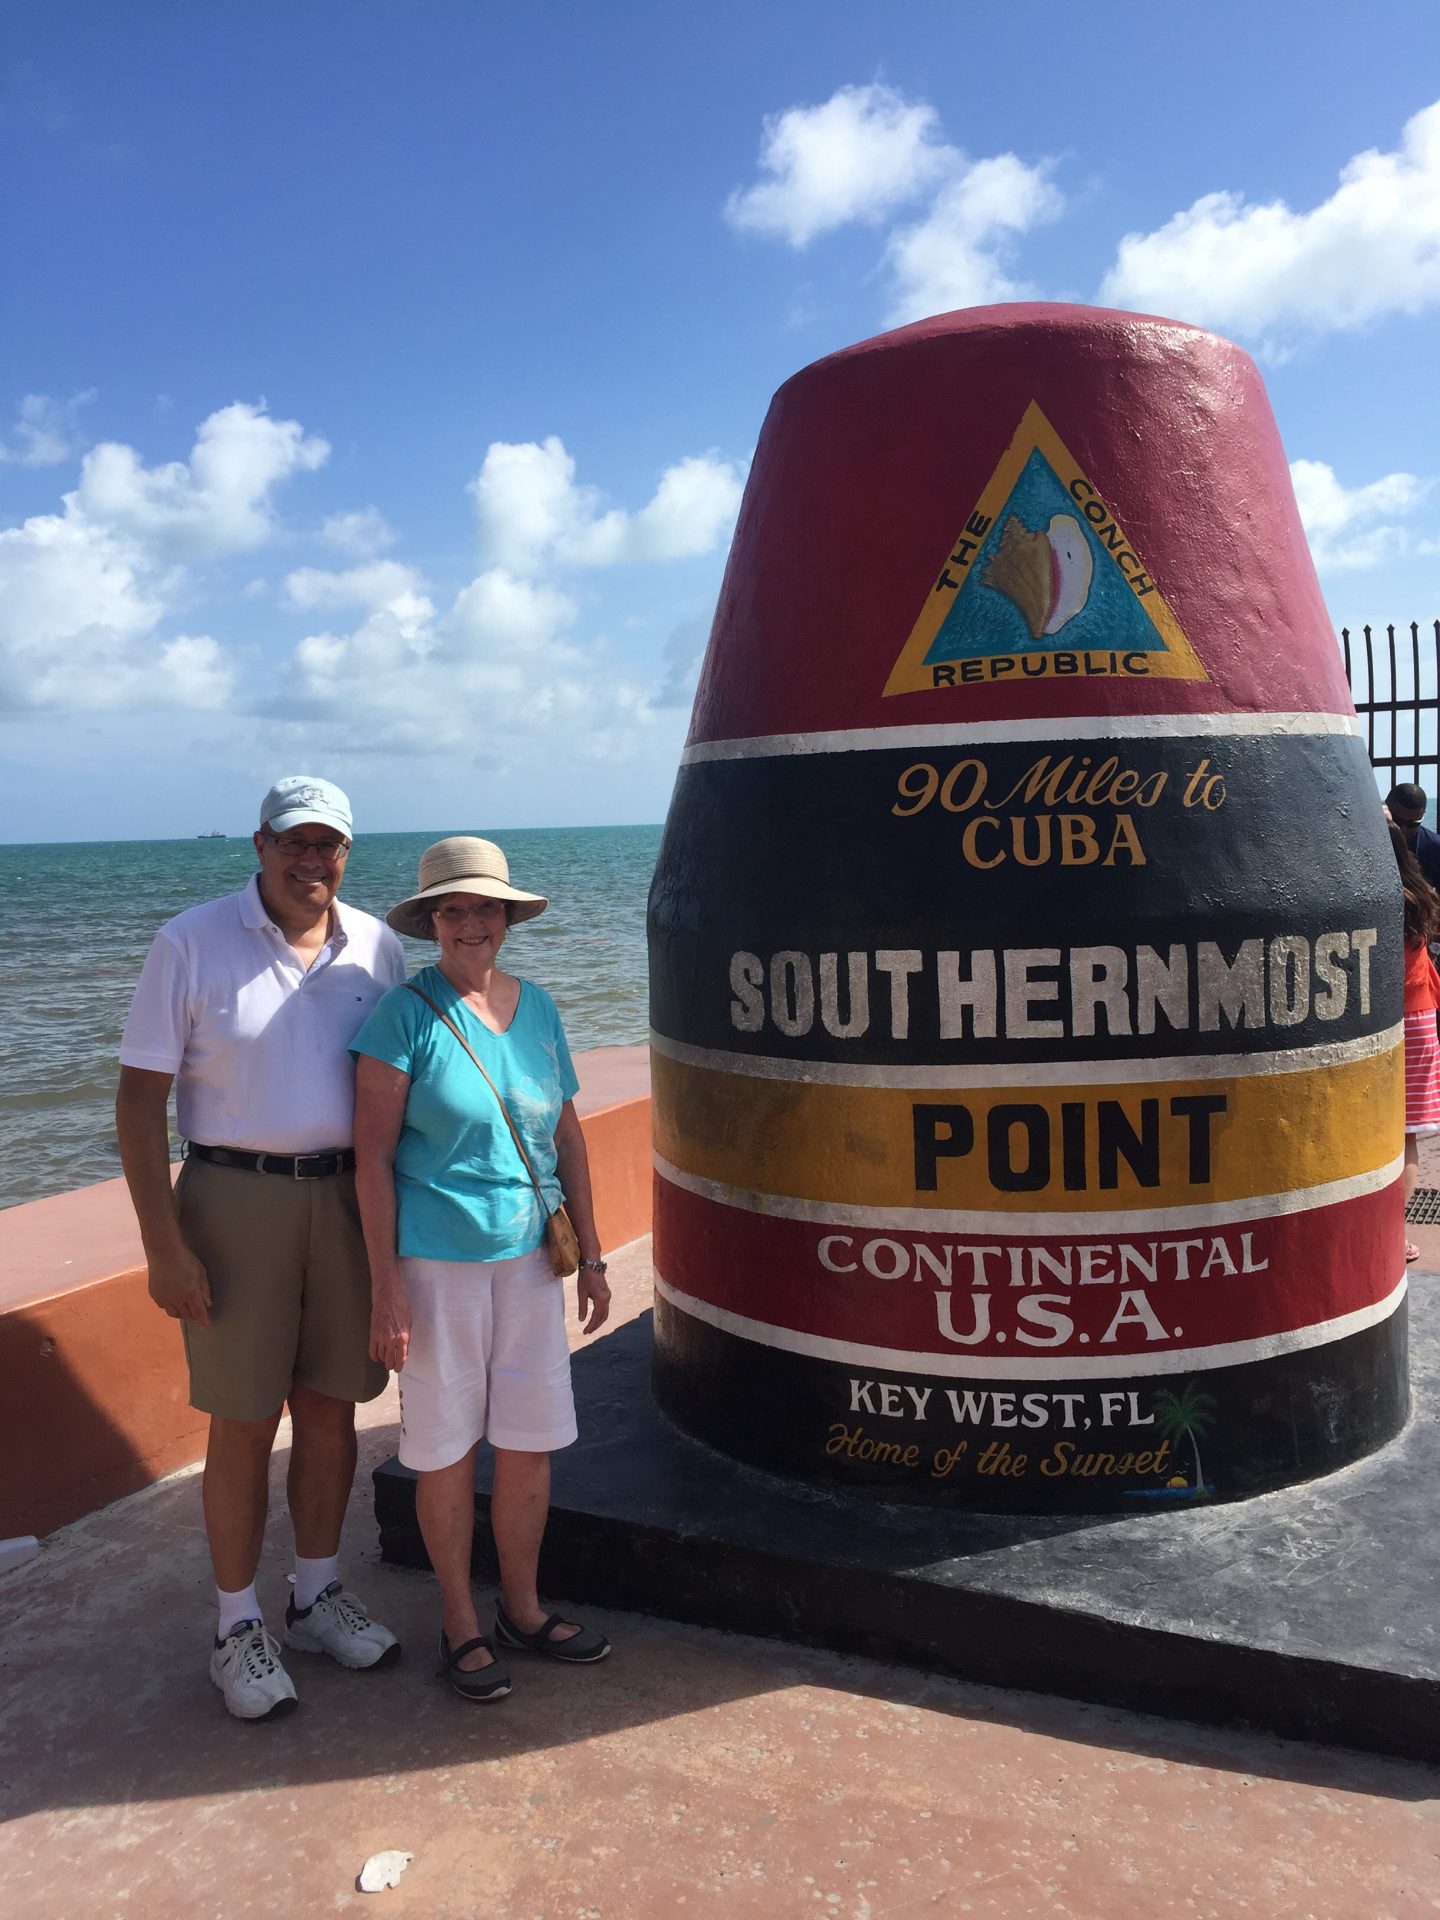 Peg and I in Key West. This is the Southern most point in the US. Peg loved going to Key West and watching the sun set.